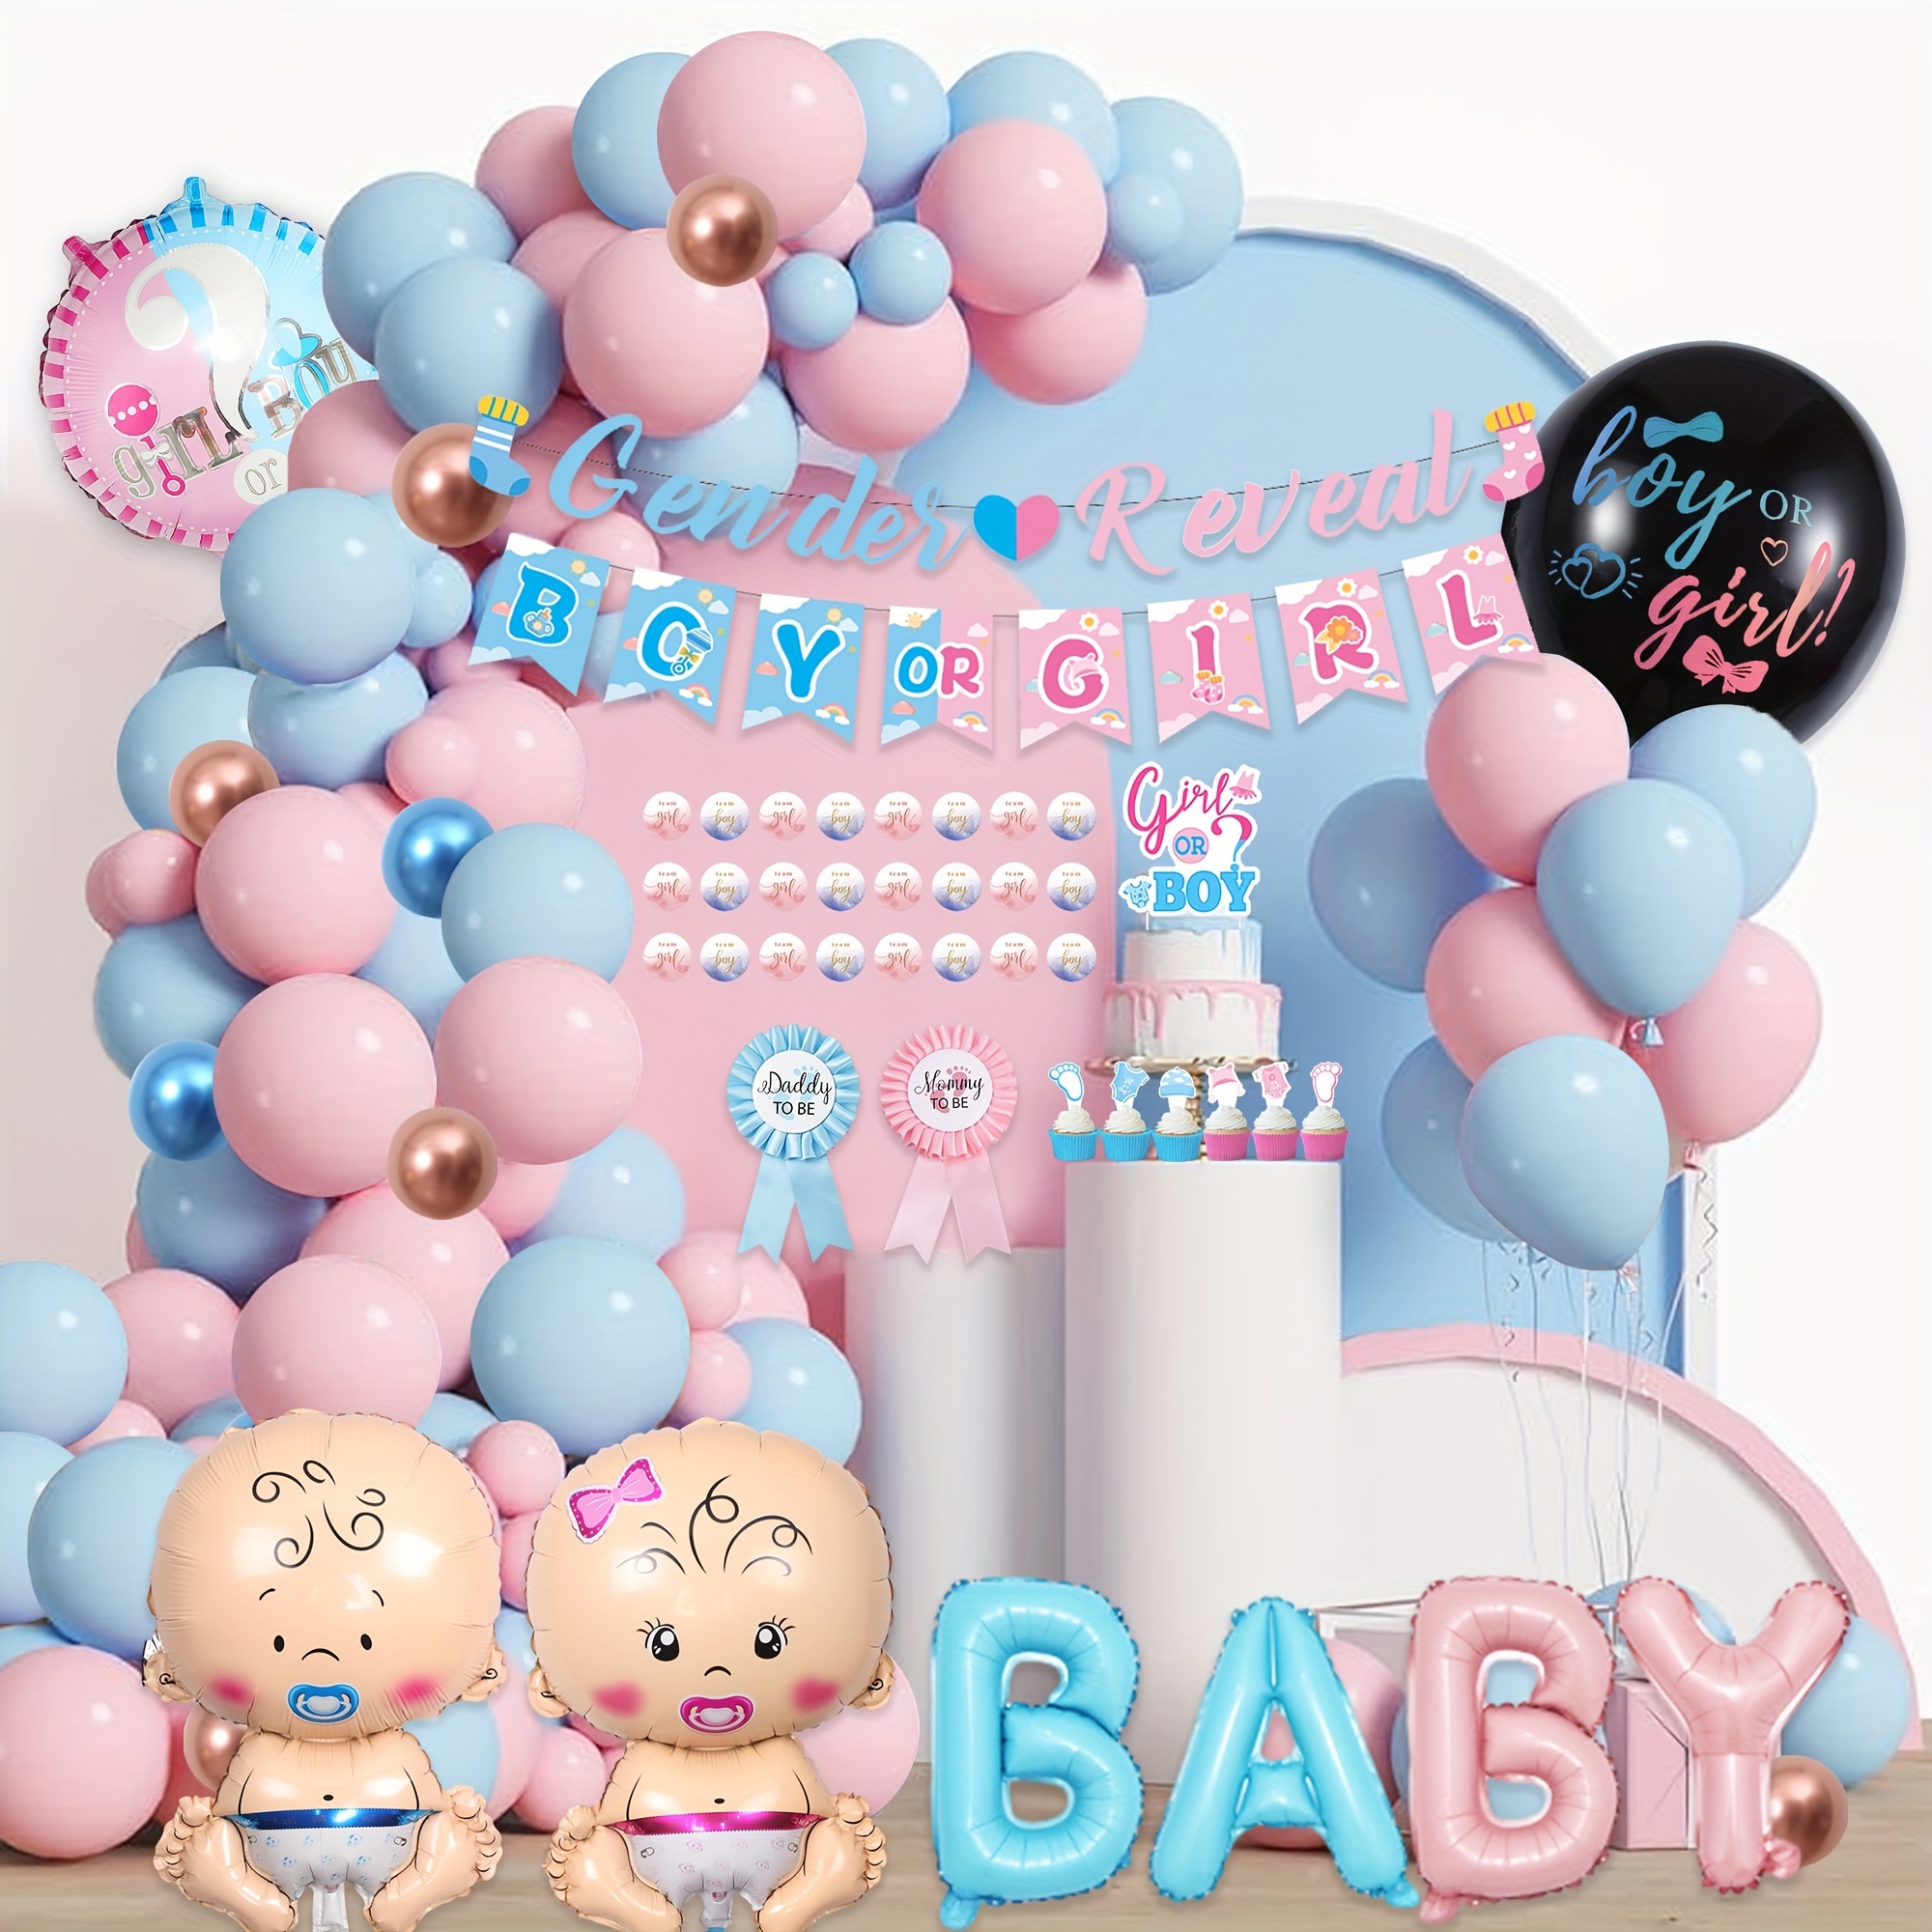 

140pcs Baby Gender Reveal Decorations, Boy Or Girl Gender Reveal Party Supplies, Including Gender Reveal Balloons, Foil Boy Or Girl Balloons, Cake Toppers, Banners, Gender Reveal Party Decor Supplies